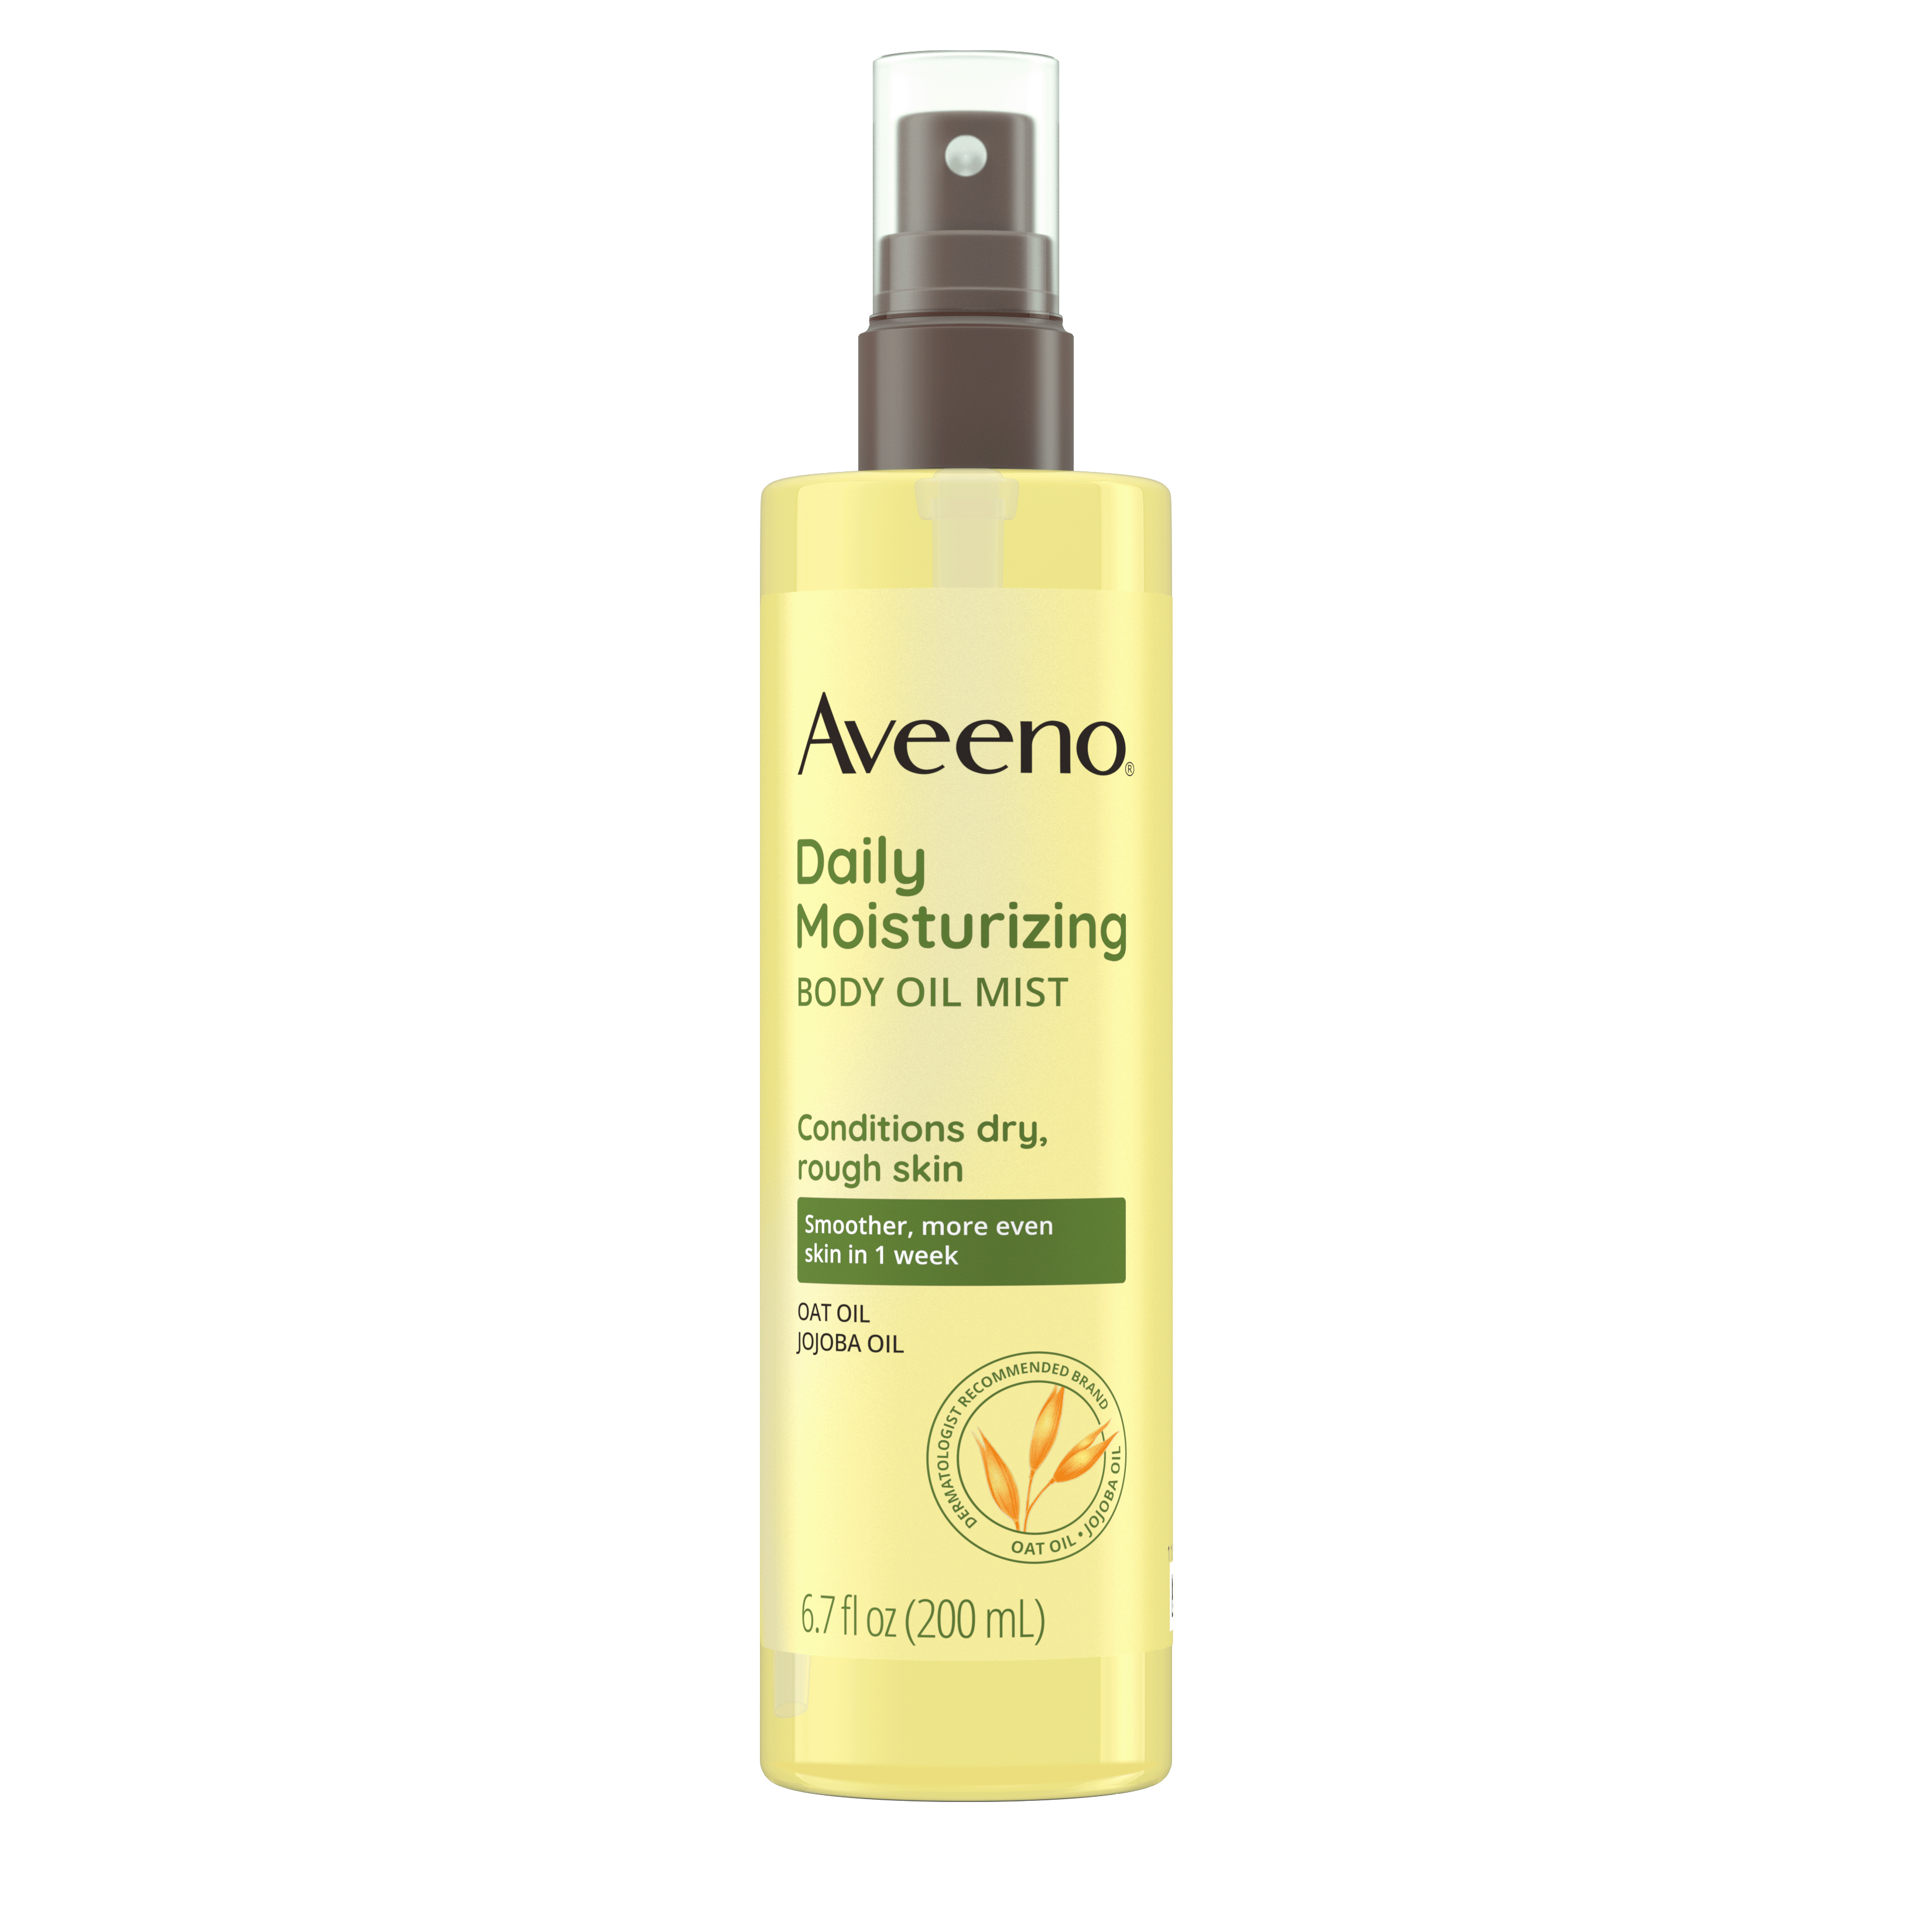 Aveeno Daily Moisturizing Body Oil Mist with Oat Oil Front